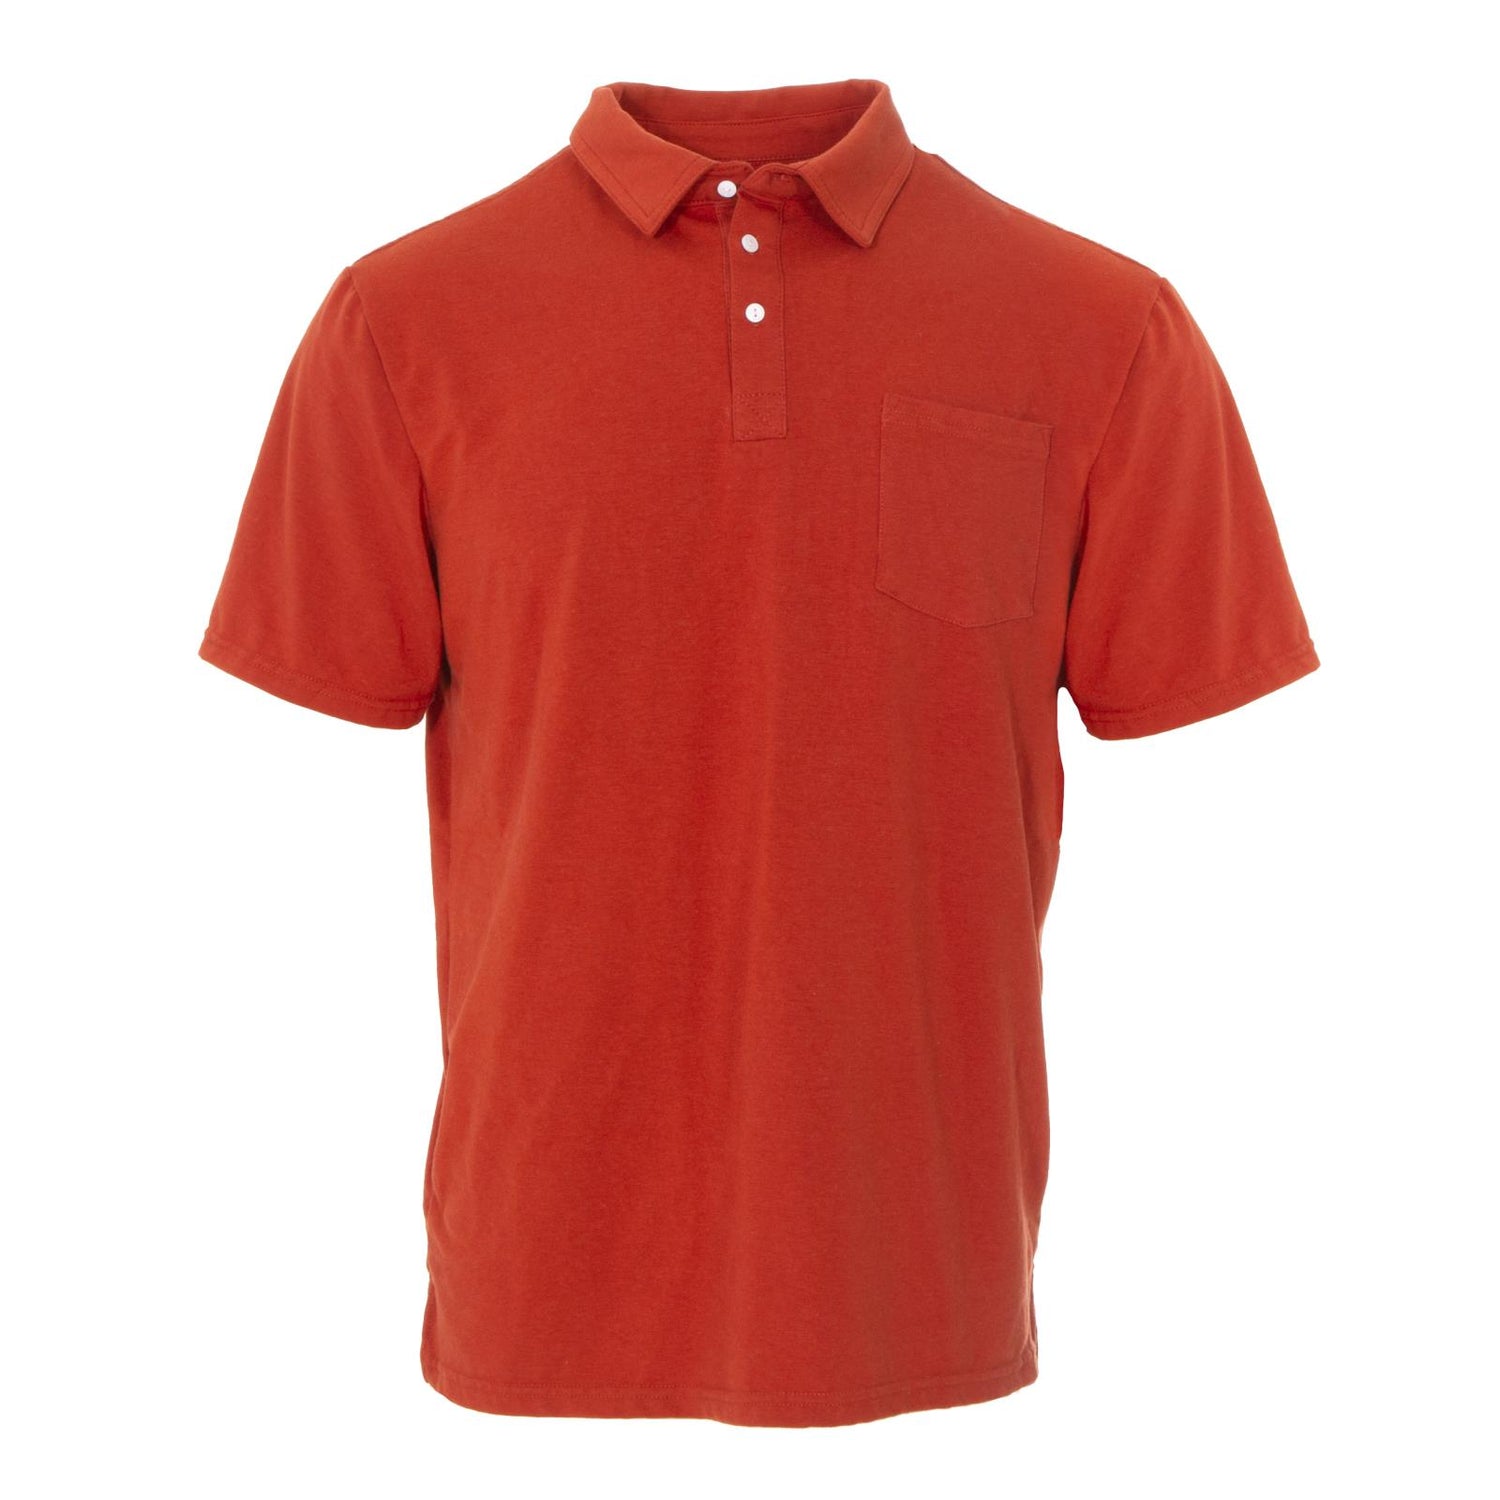 Men's Short Sleeve Luxe Jersey Polo with Pocket in Red Tea